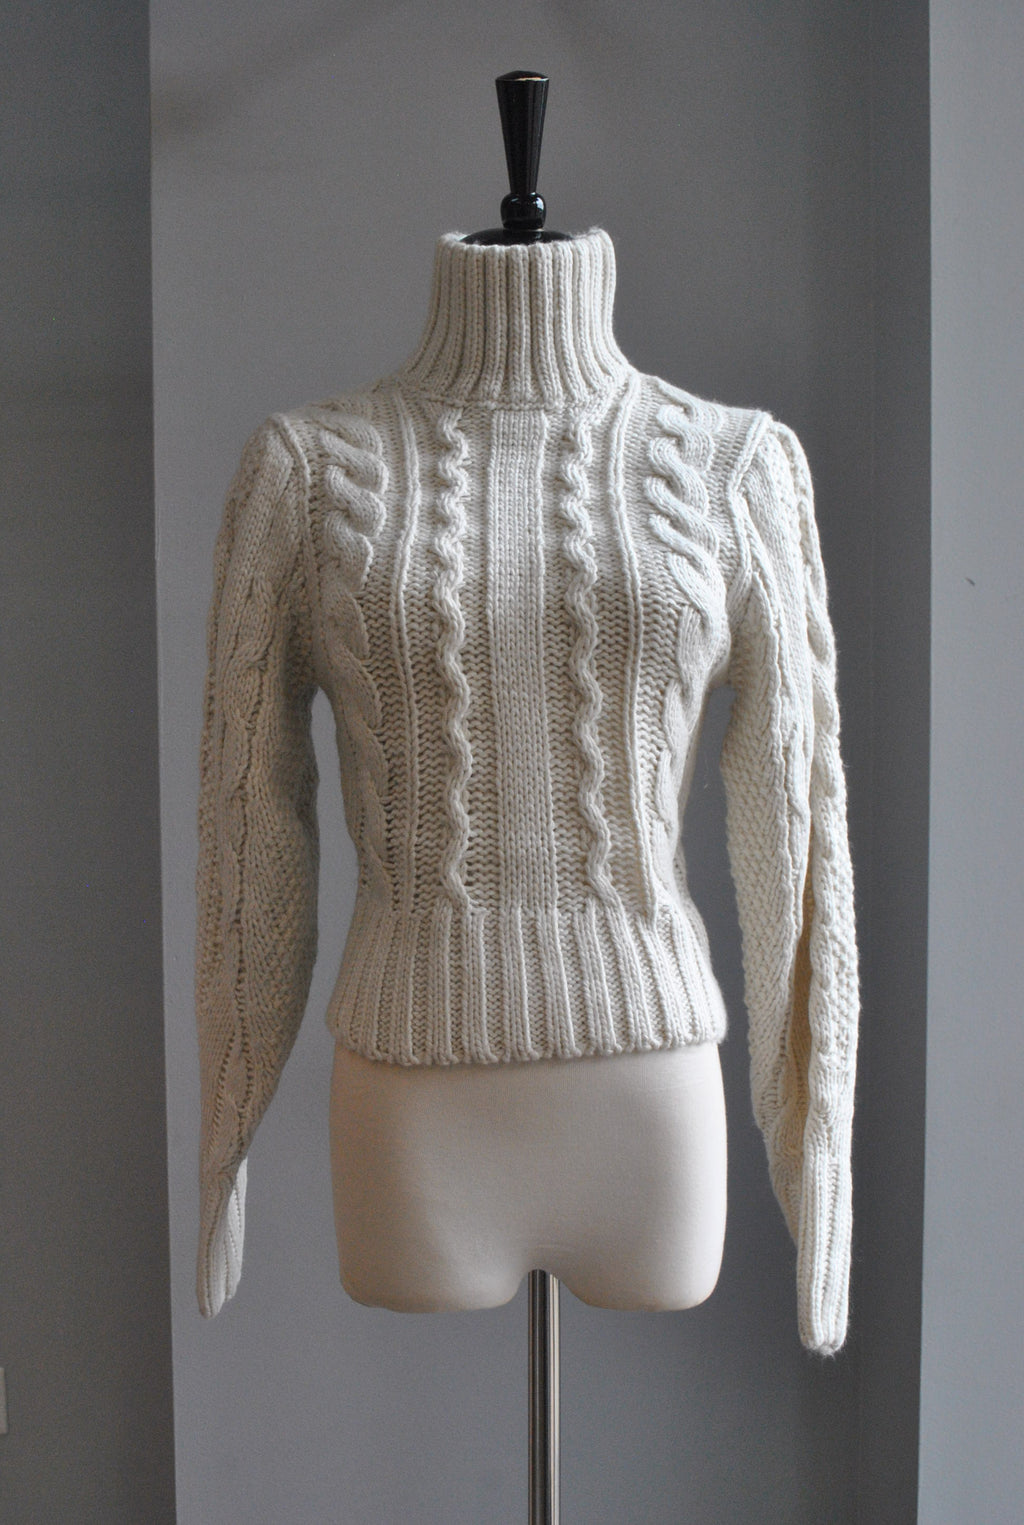 OFF WHITE TURTLENECK STYLE SWEATER